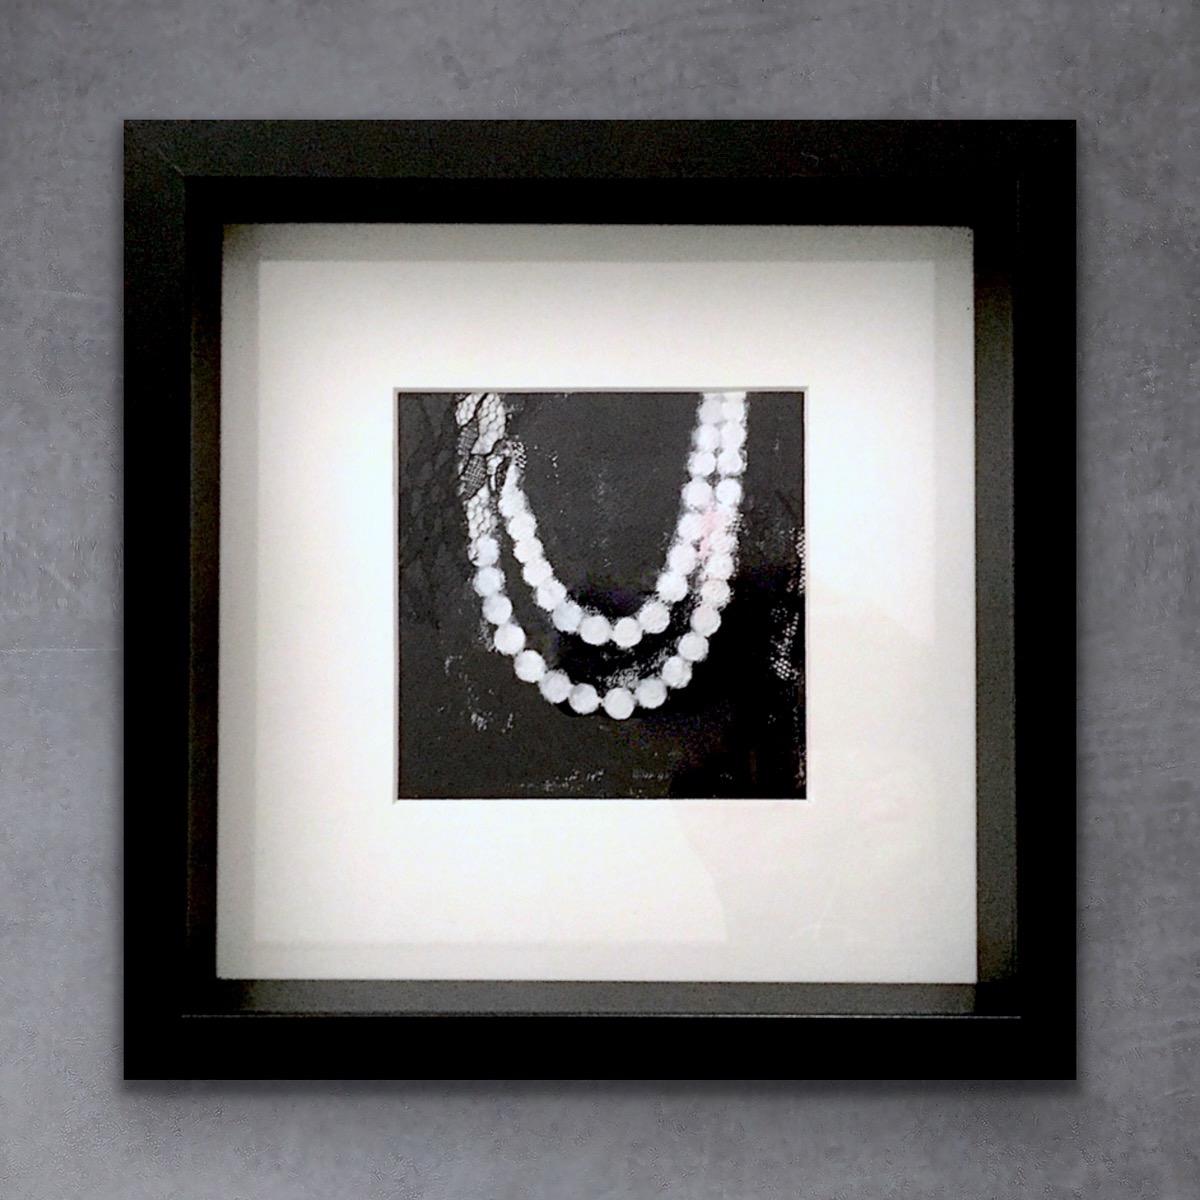 Andrea Stajan-Ferkul Figurative Painting - Pearls And Lace (black and white, 10"x10", framed)